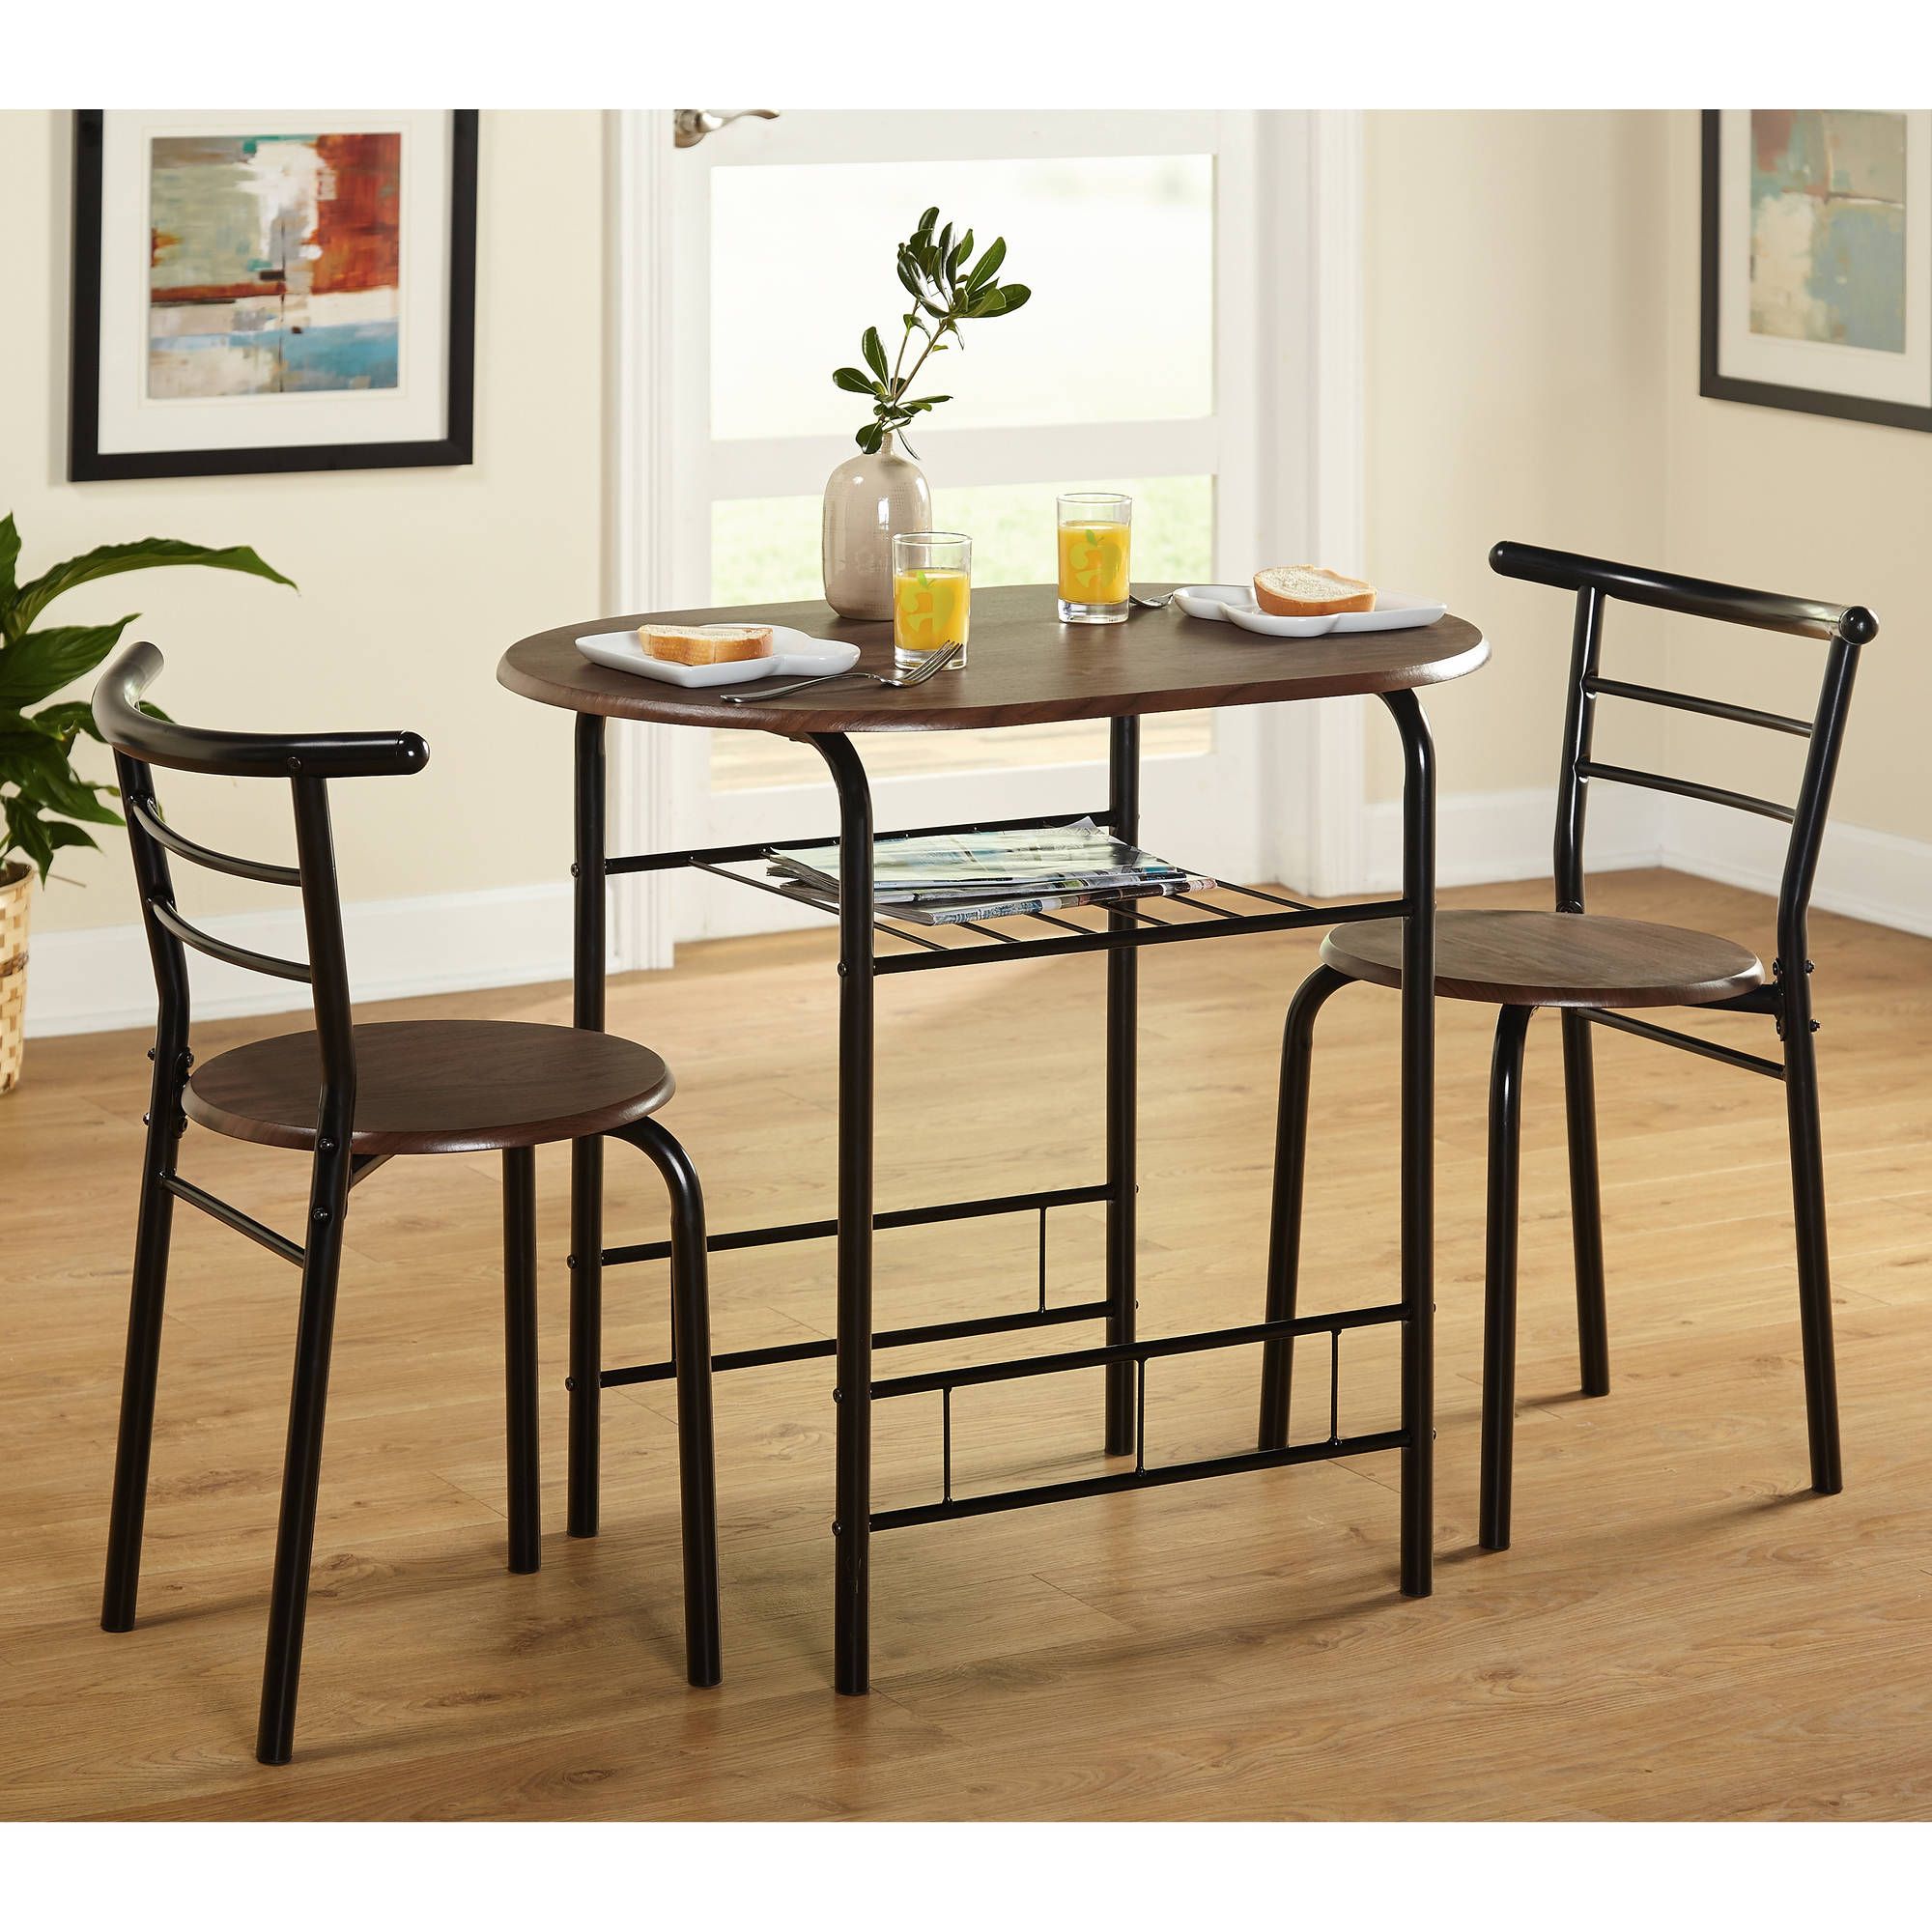 Bate Red Retro 3 Piece Dining Sets Regarding Latest Tms 3 Piece Bistro Dining Set – Walmart (View 2 of 20)